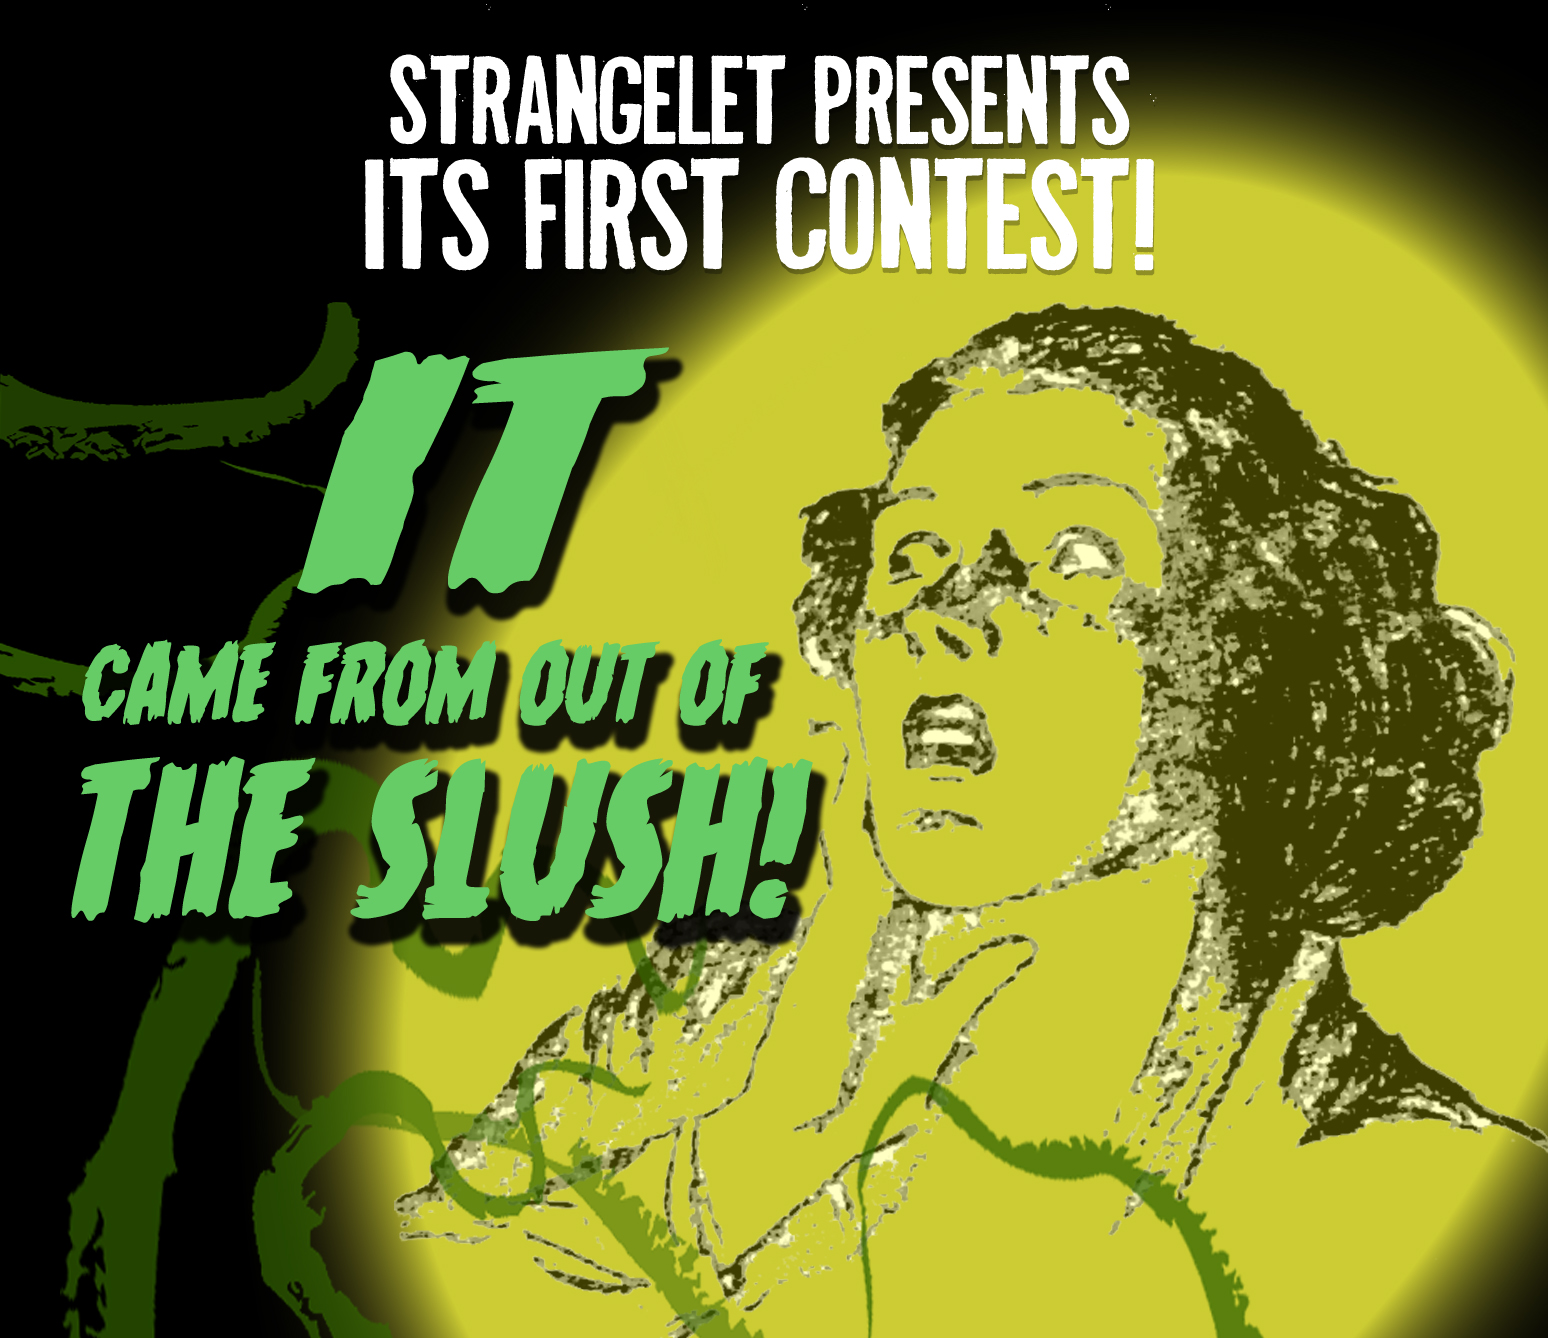 Strangelet presents its first contest! It came from out of the slush!